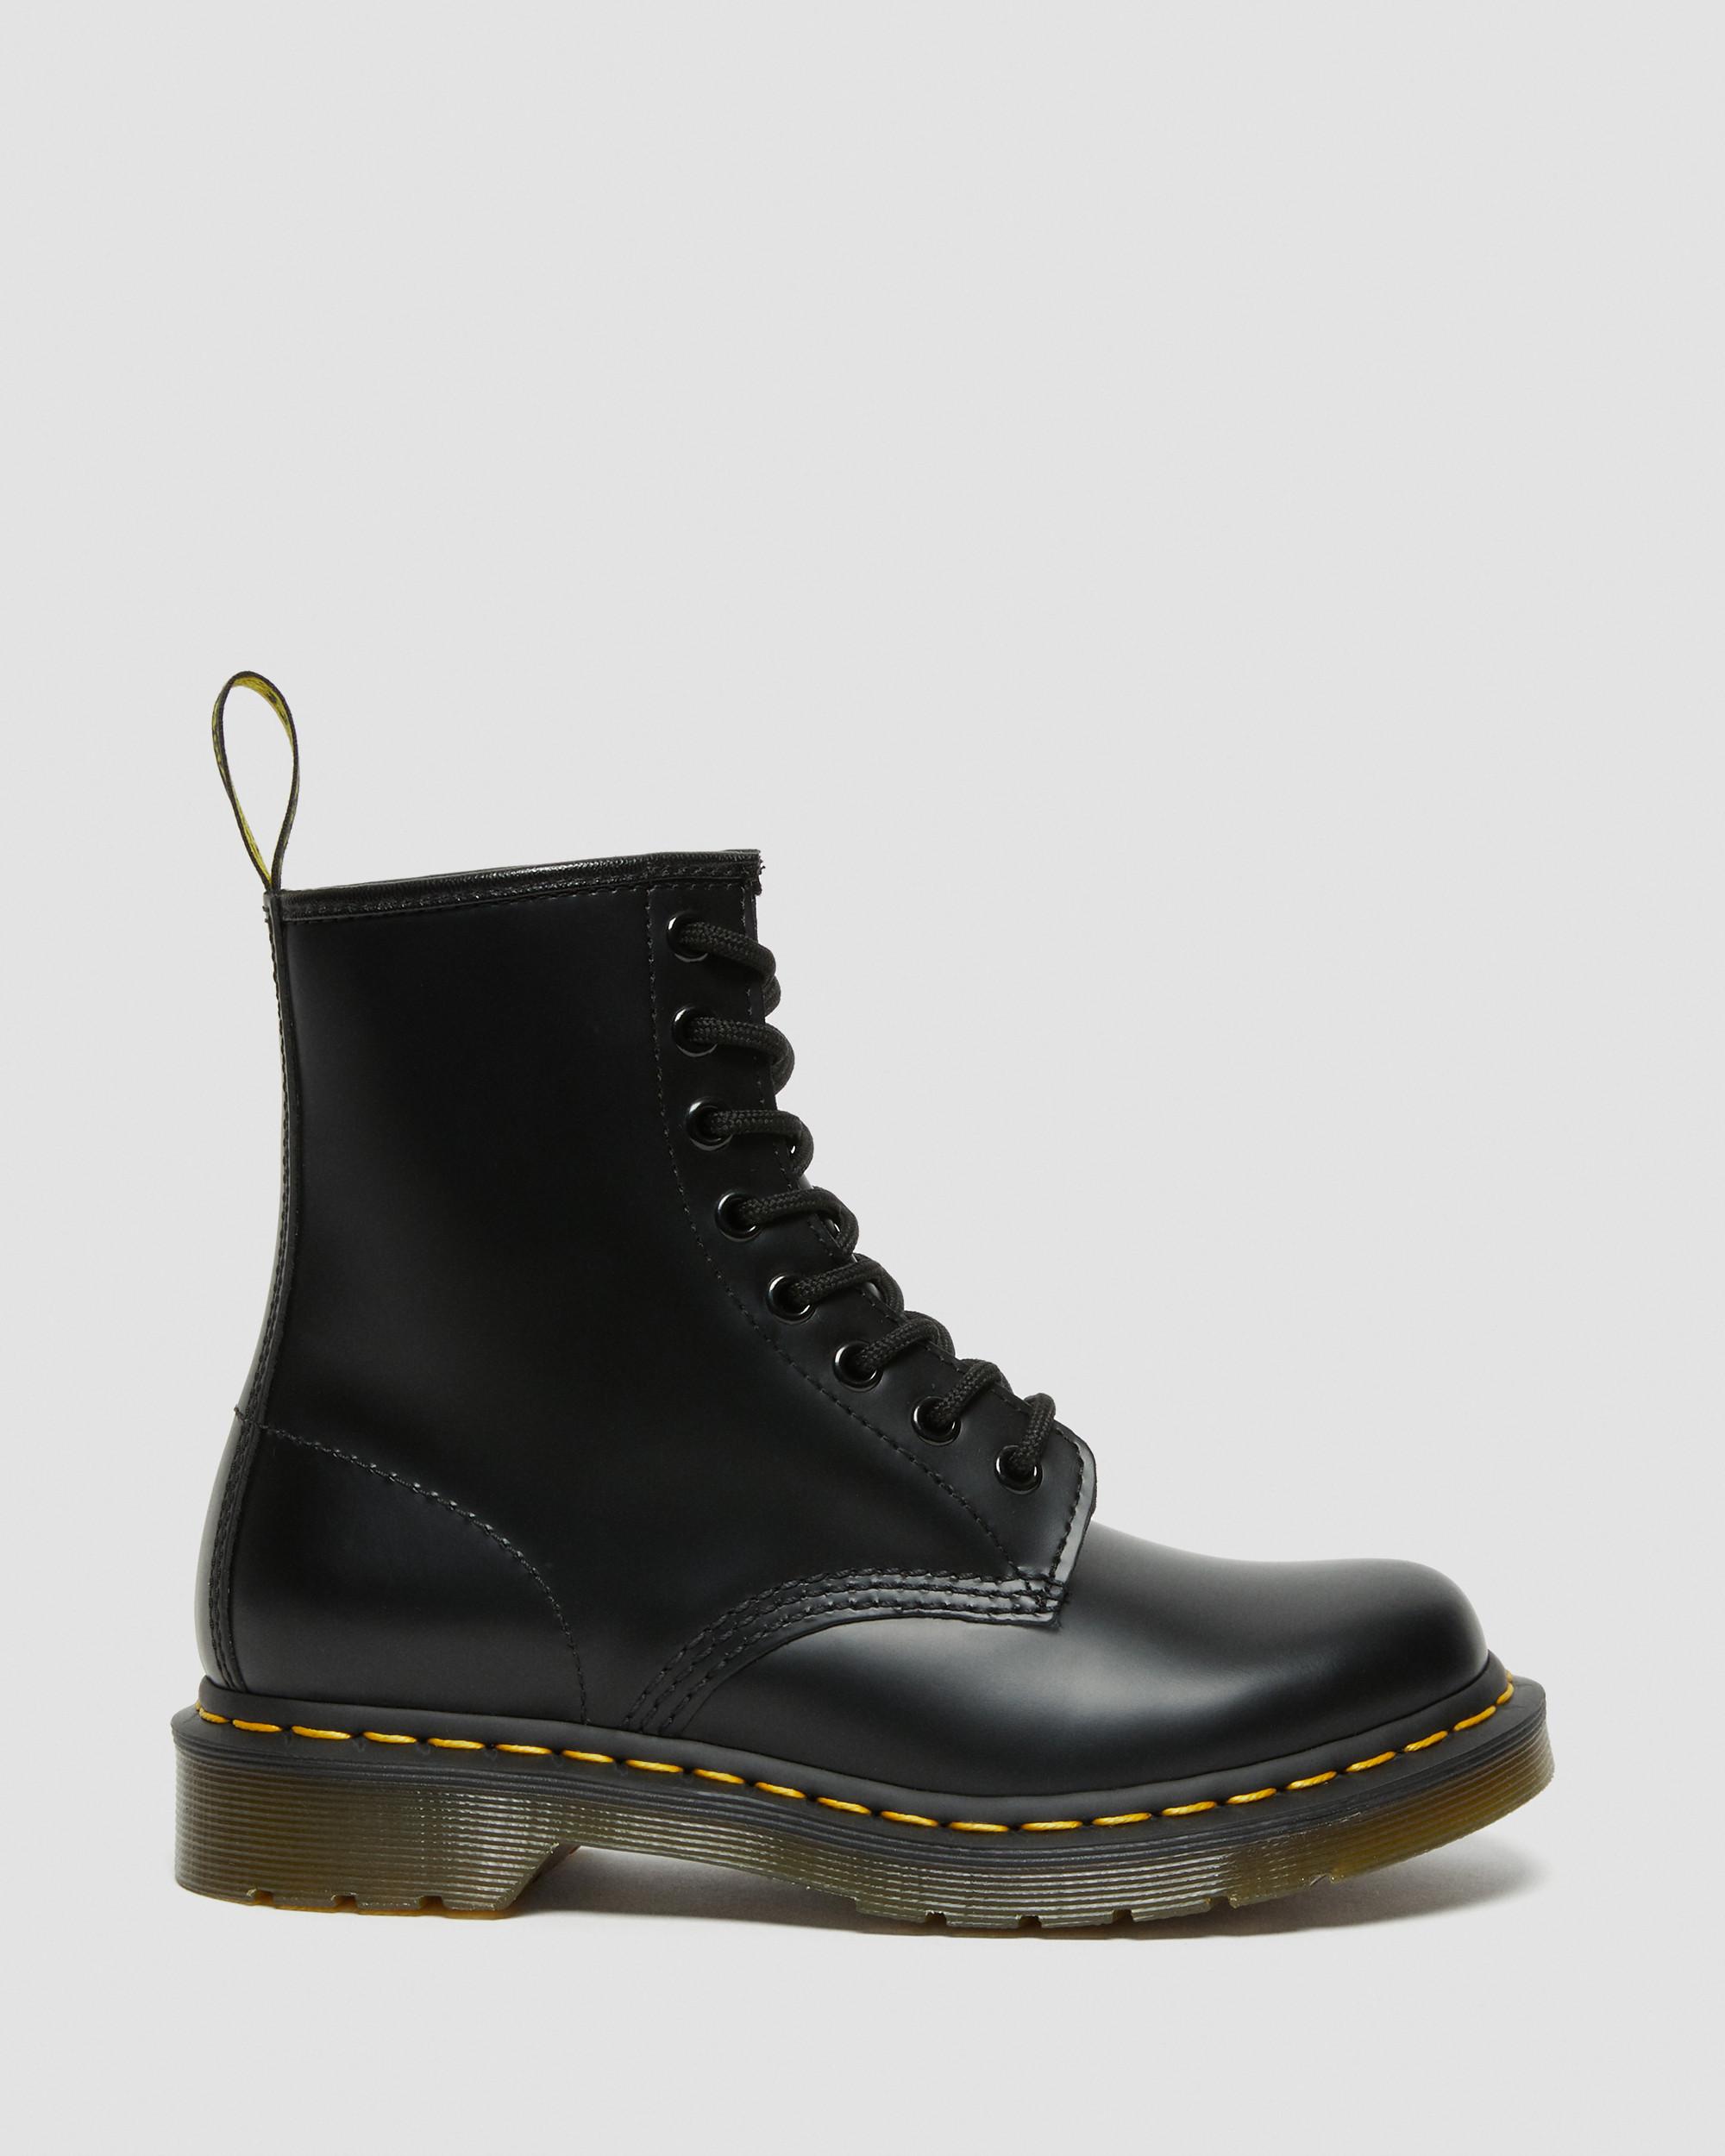 Dr. Martens Women's 8-Eye Smooth Combat Boot, Black, Size 10M